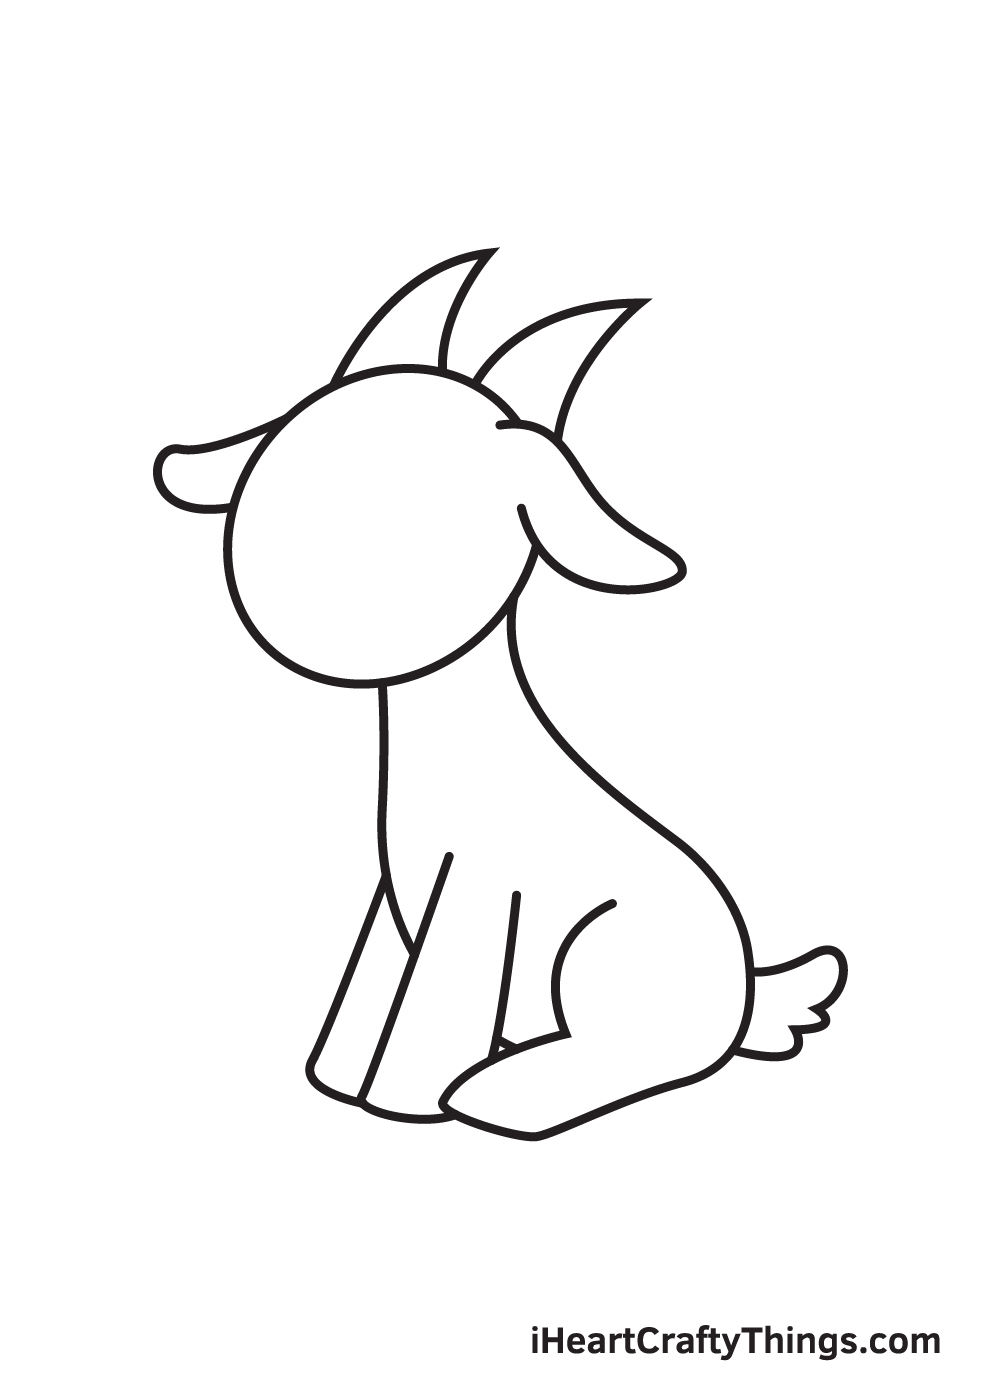 Drawing Worksheet For Preschool Kids With Easy Gaming Level Of Difficulty,  Simple Educational Game For Kids To Finish The Picture By Sample And Draw  The Horn Goat Royalty Free SVG, Cliparts, Vectors,